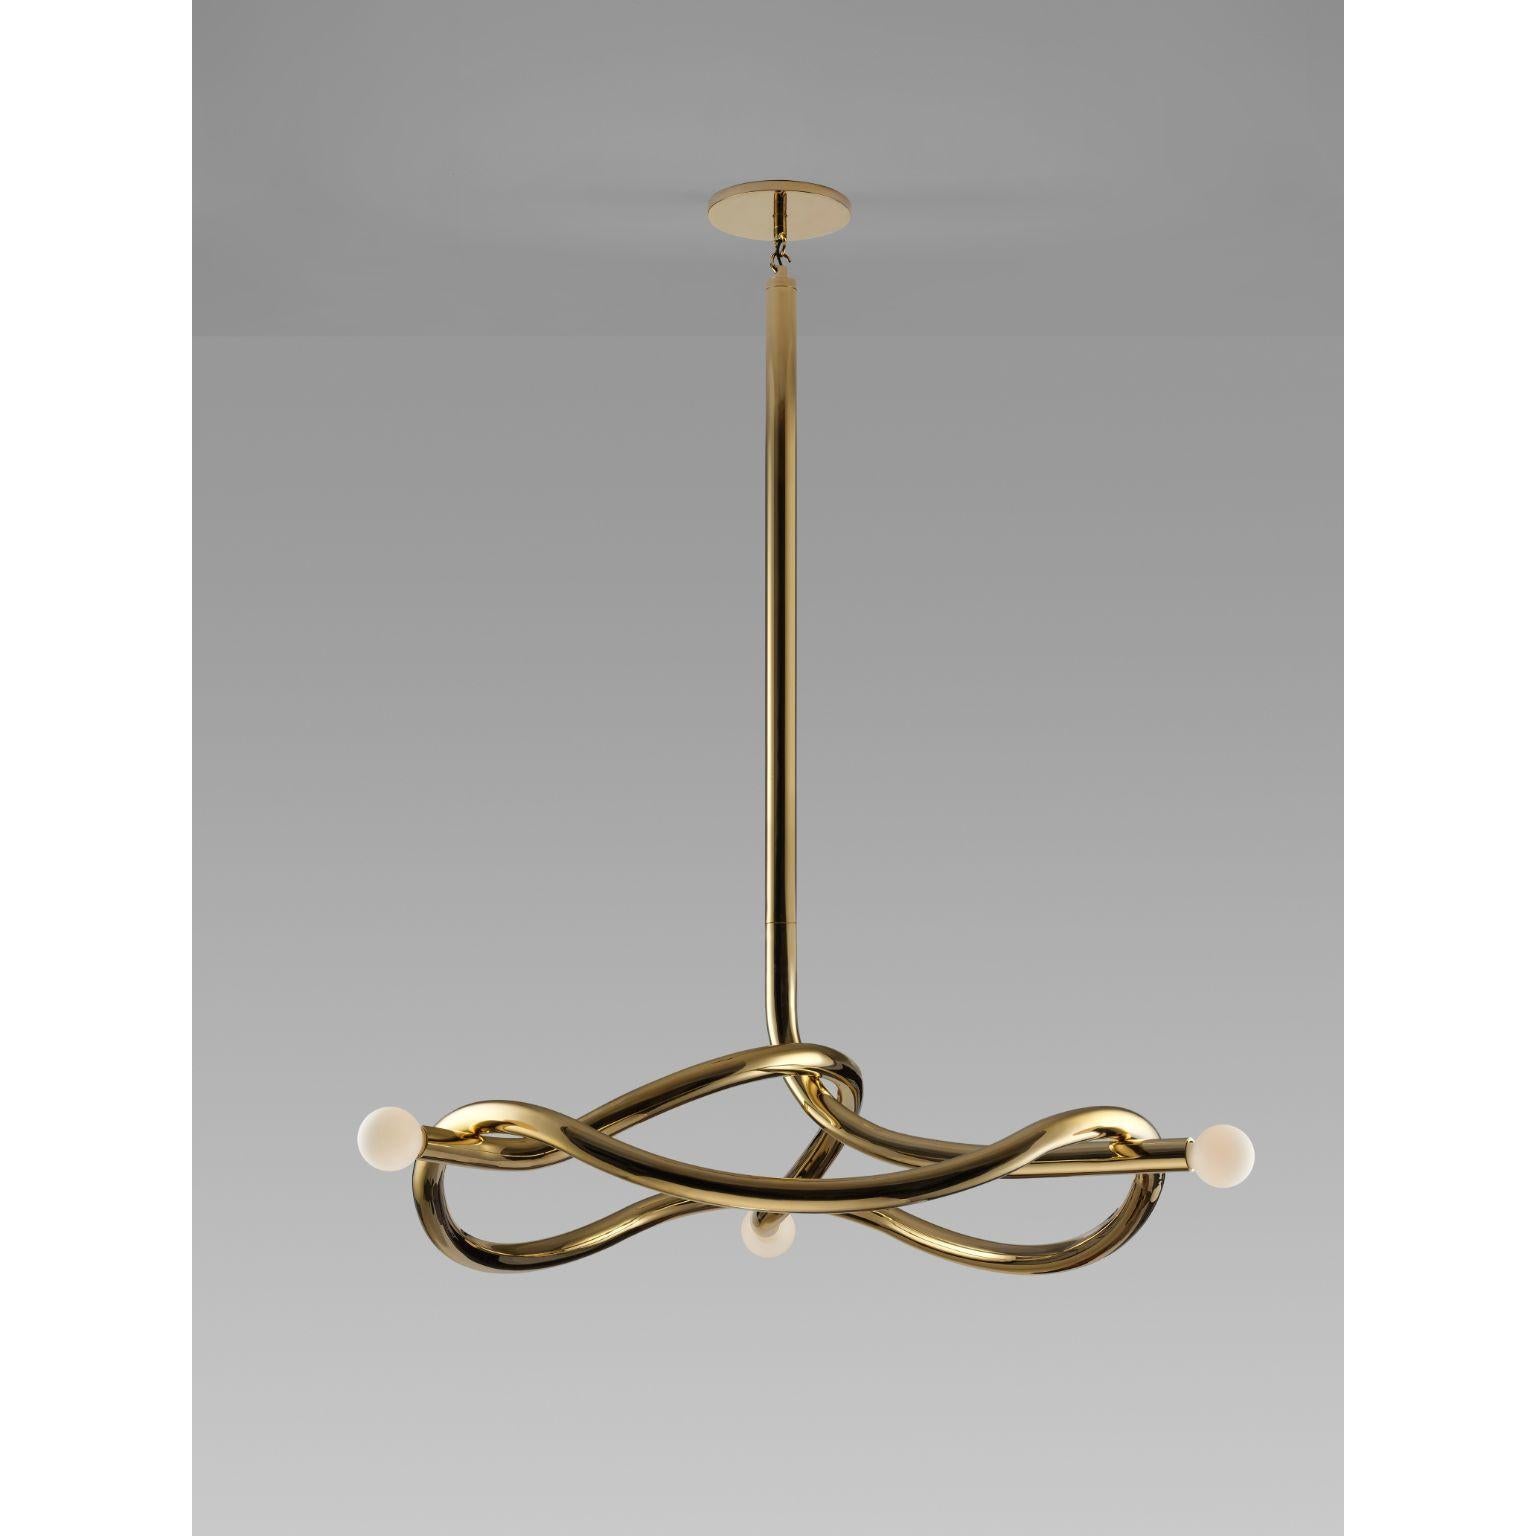 Tryst Three Chandelier by Paul Matter
Materials: Brass and porcelain finish glass
Dimensions: W 114.3 x H 182.8 cm
Wight: 15 kg

Tryst chandelier explores the relationship between interlocked forms in perfect union and balance. A study of form